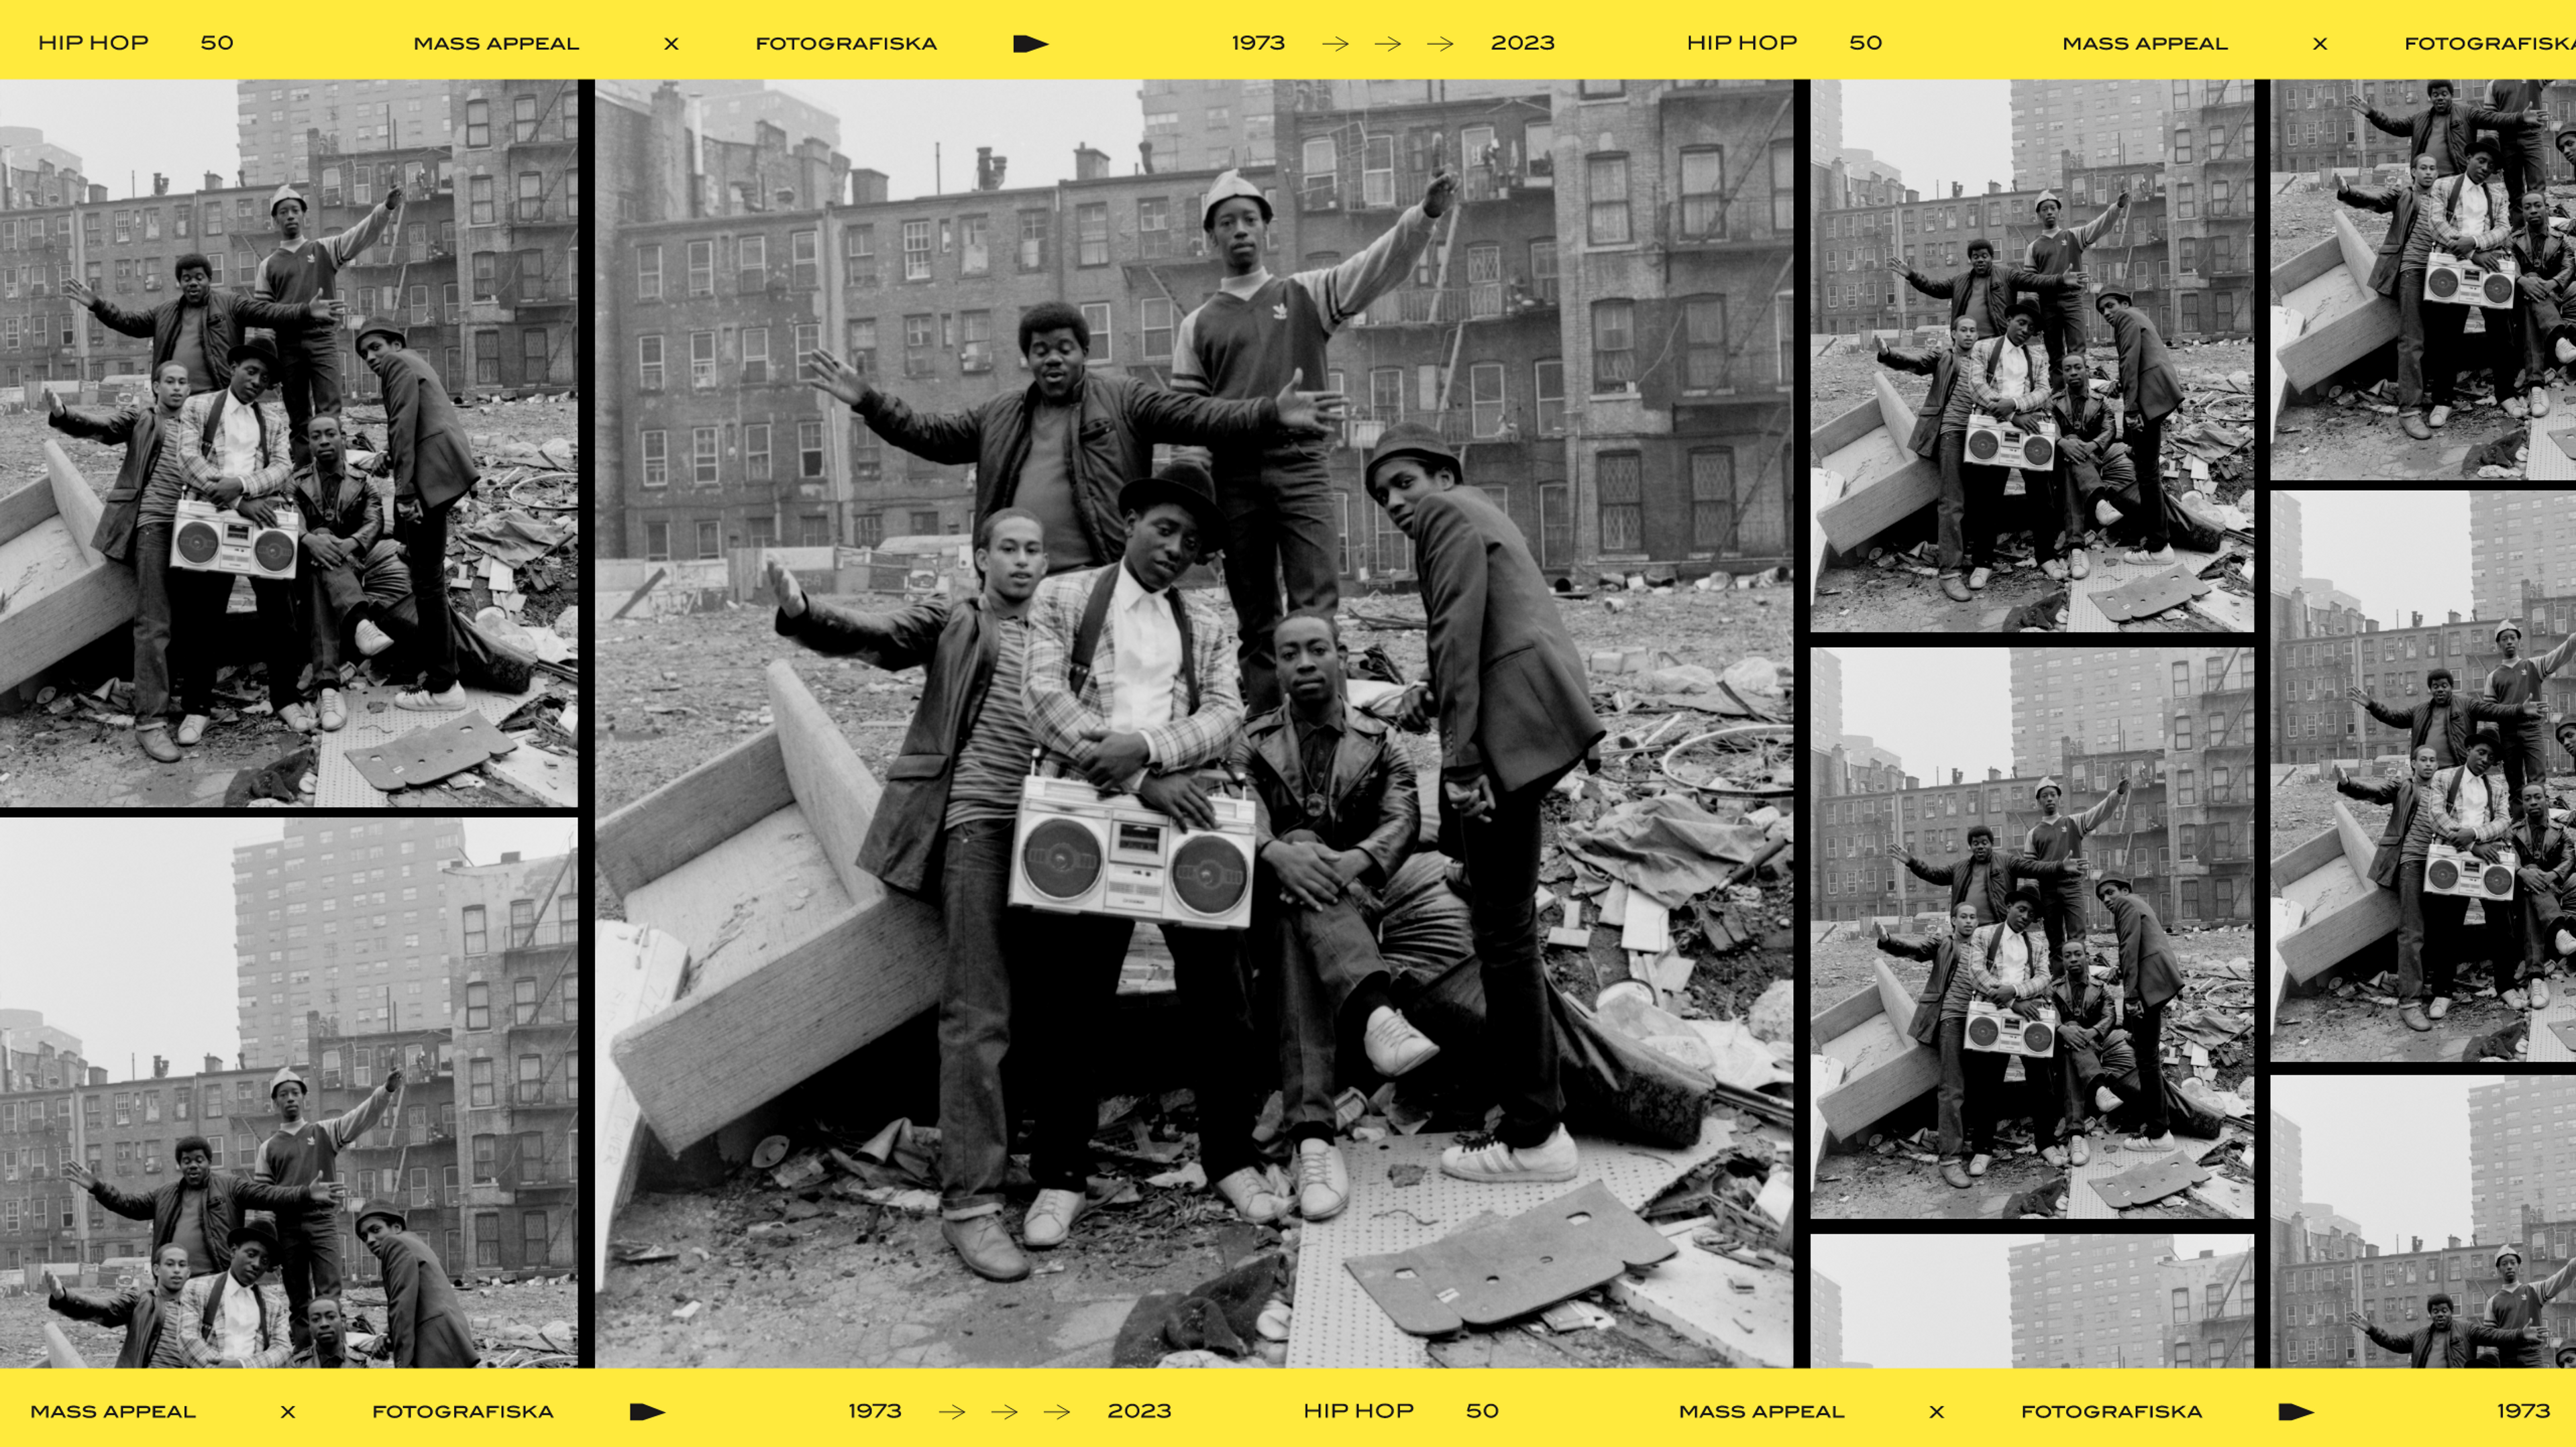 A collage of black and white photographs of a group of people holding a boom box in a city setting